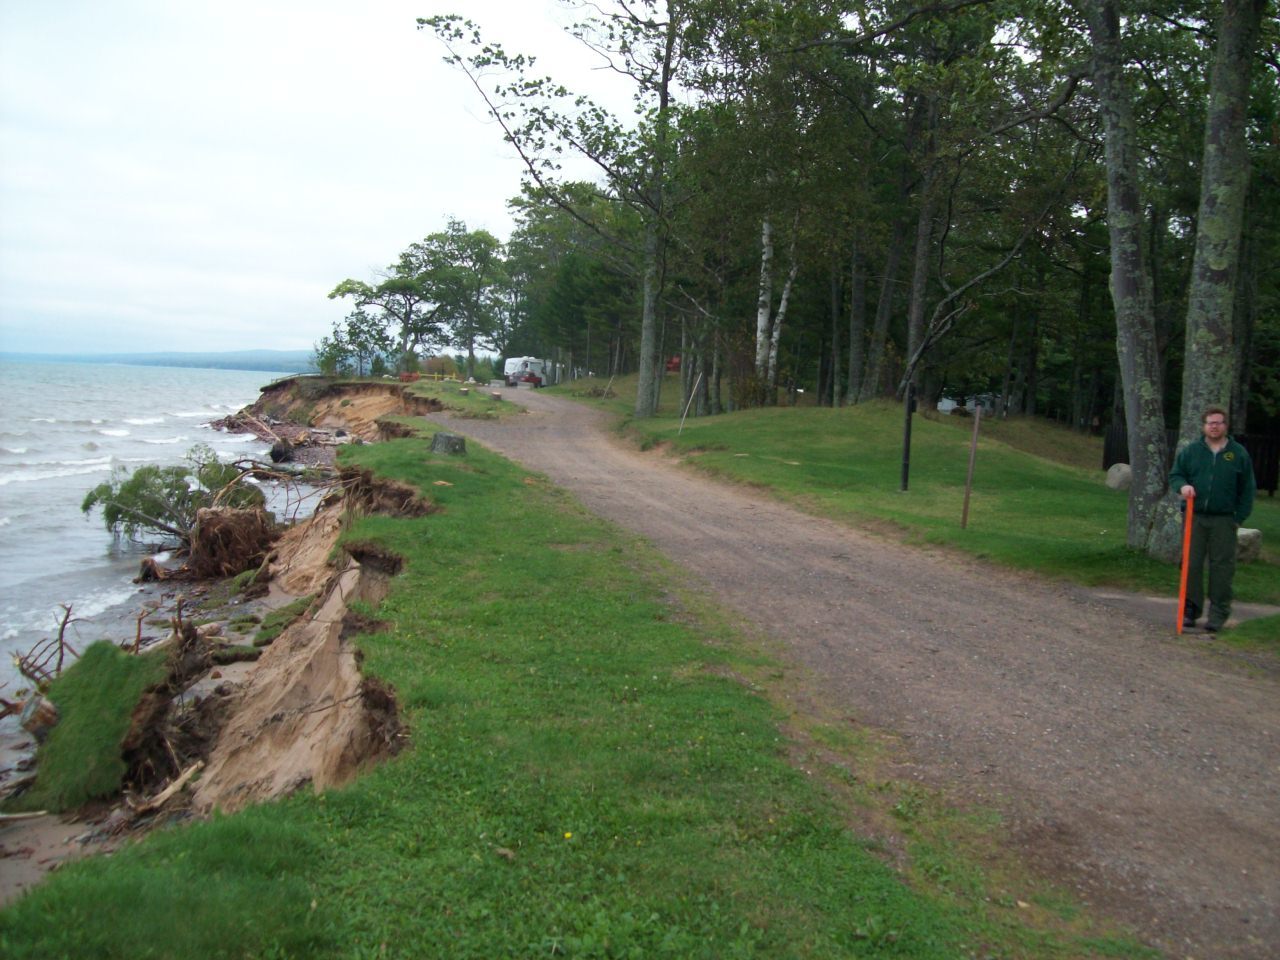 The aftermath of erosion at F.J. McLain State Park in September 2016.